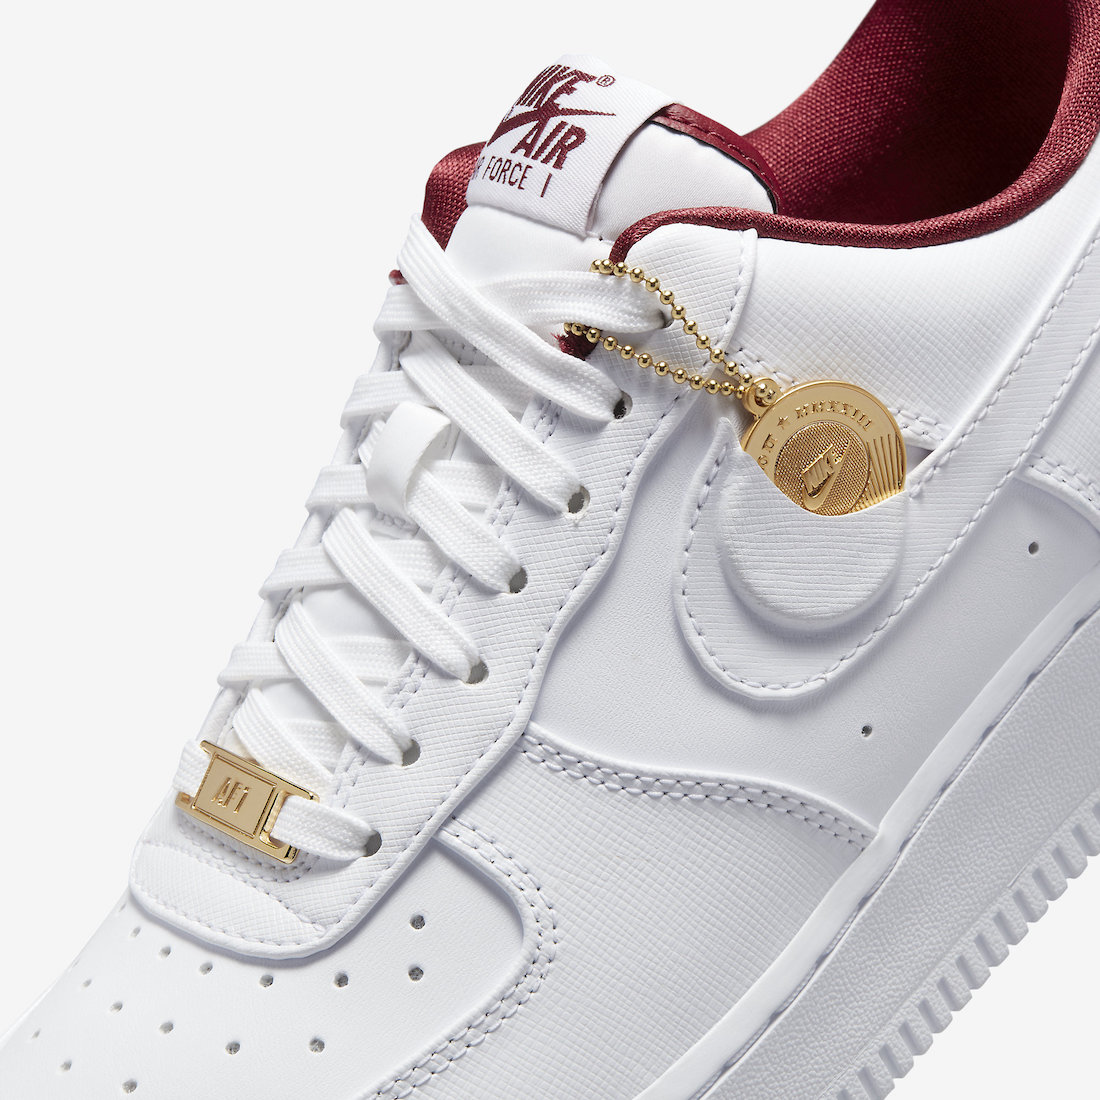 Who Decides War x Nike Air Force 1 Collab Release Date, Price